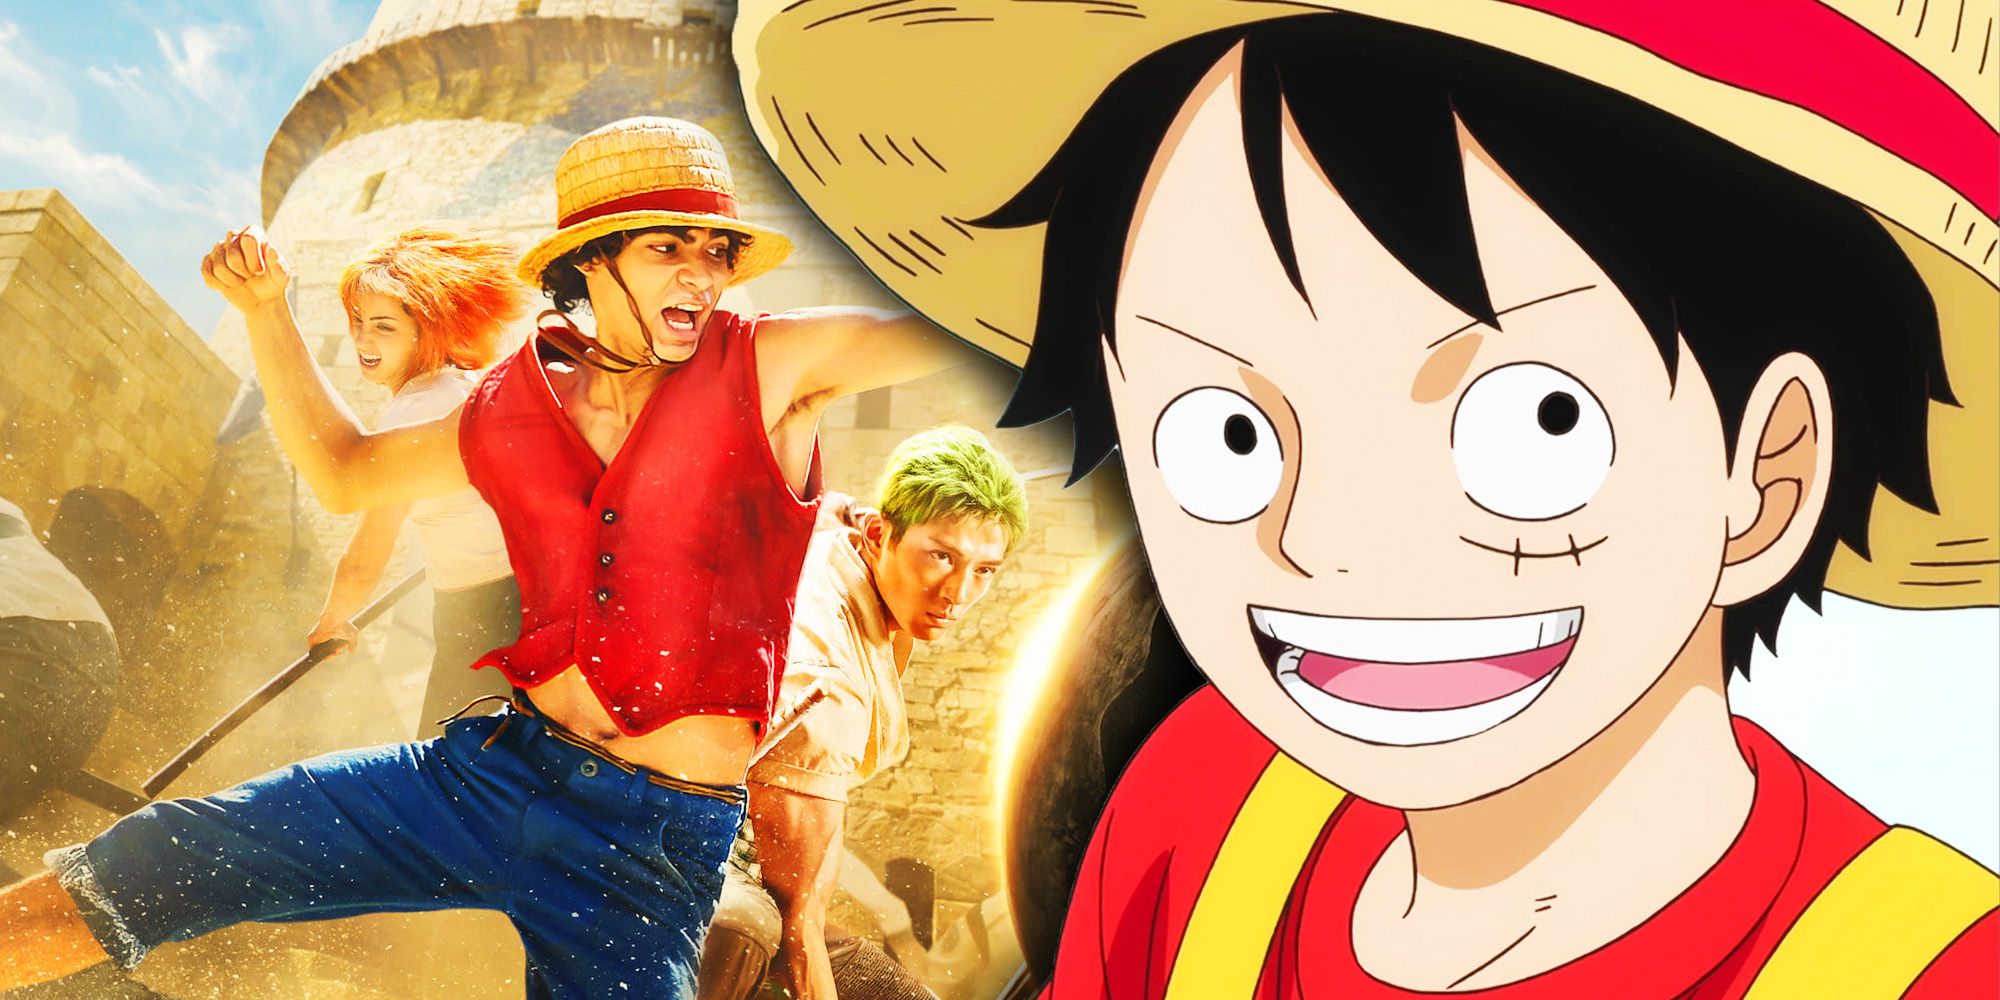 “The Characters Are Alive”: One Piece’s Creator Has The Best Explanation For The Series’ Pacing